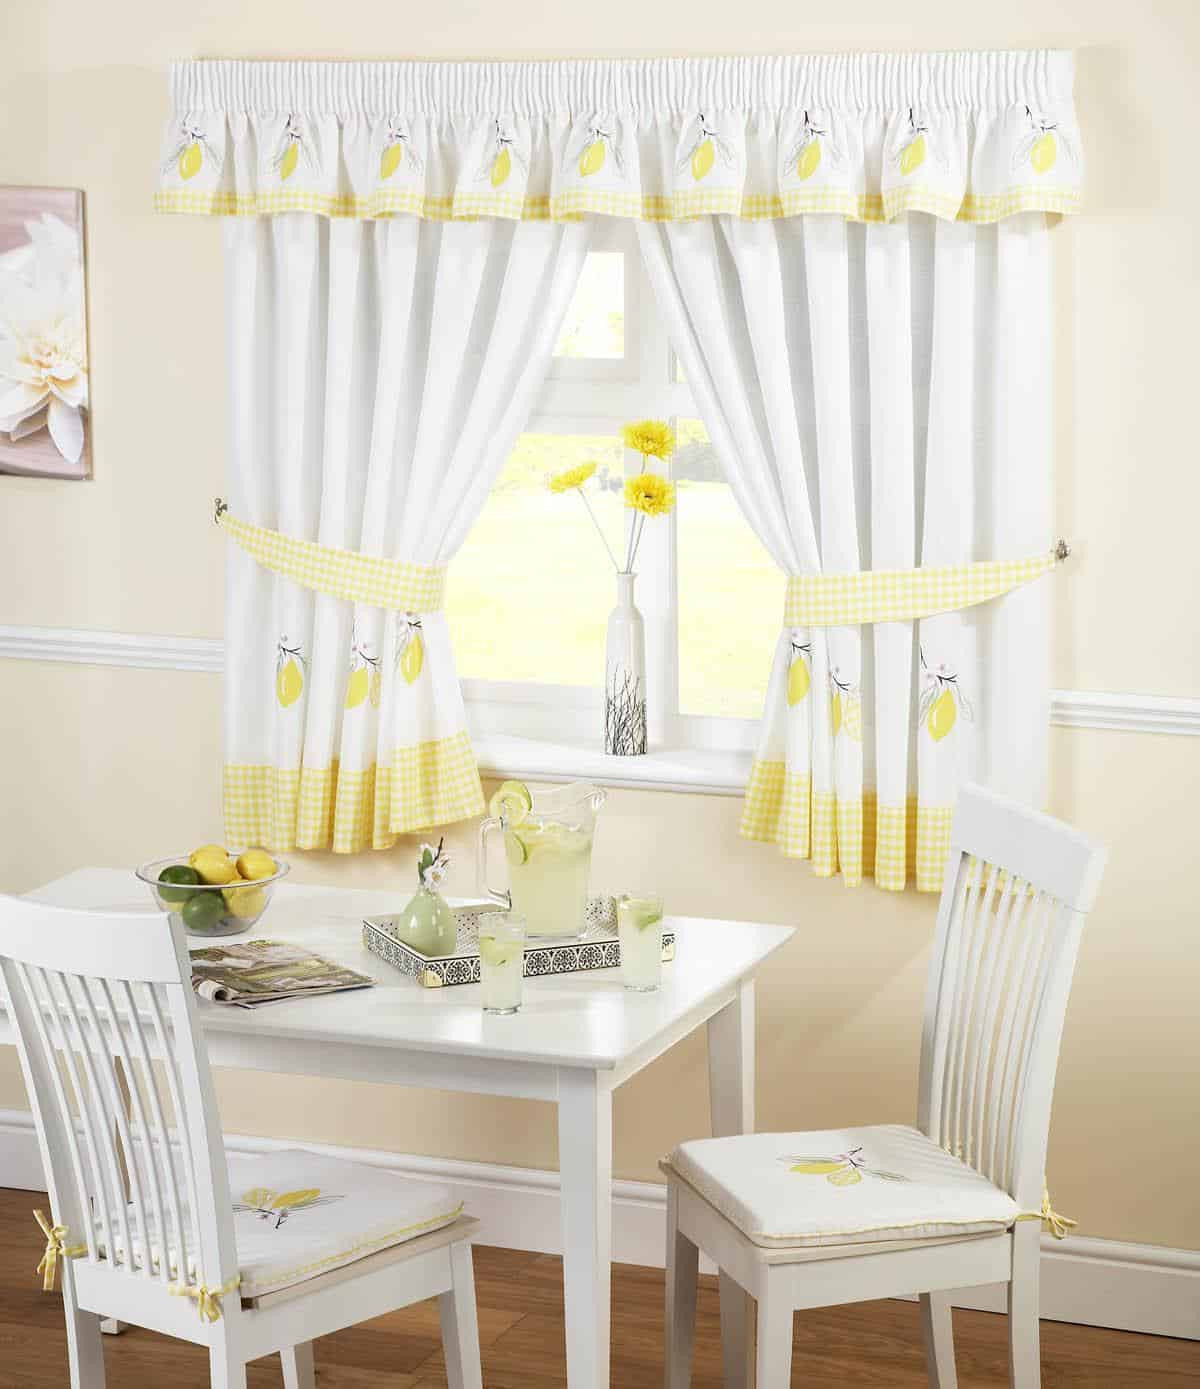 Lemon Kitchen Curtains
 Selection of Kitchen Curtains for Modern Home Decoration